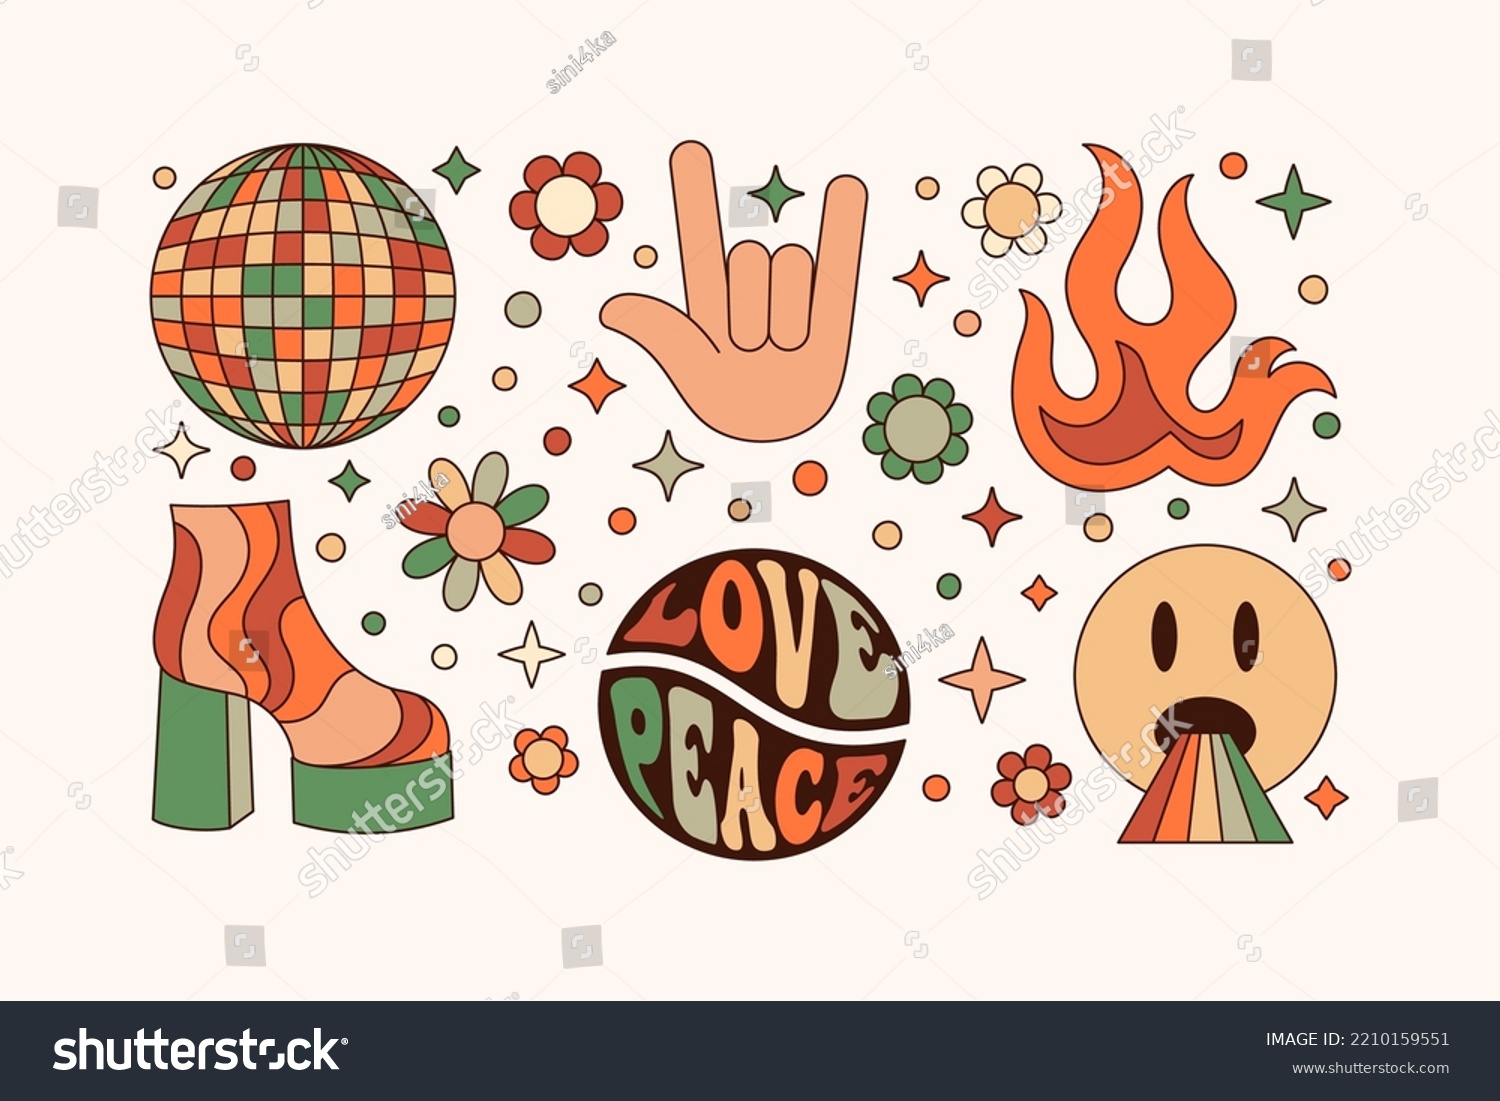 SVG of Groovy Elements Set in Retro Hippie Style 70s . Geometric Abstract Vector Stickers: Disco Ball, Rock Hand, Fire, Shoe and Emoji for Print on T-Shirts, Posters, Creating Logo, Patterns svg